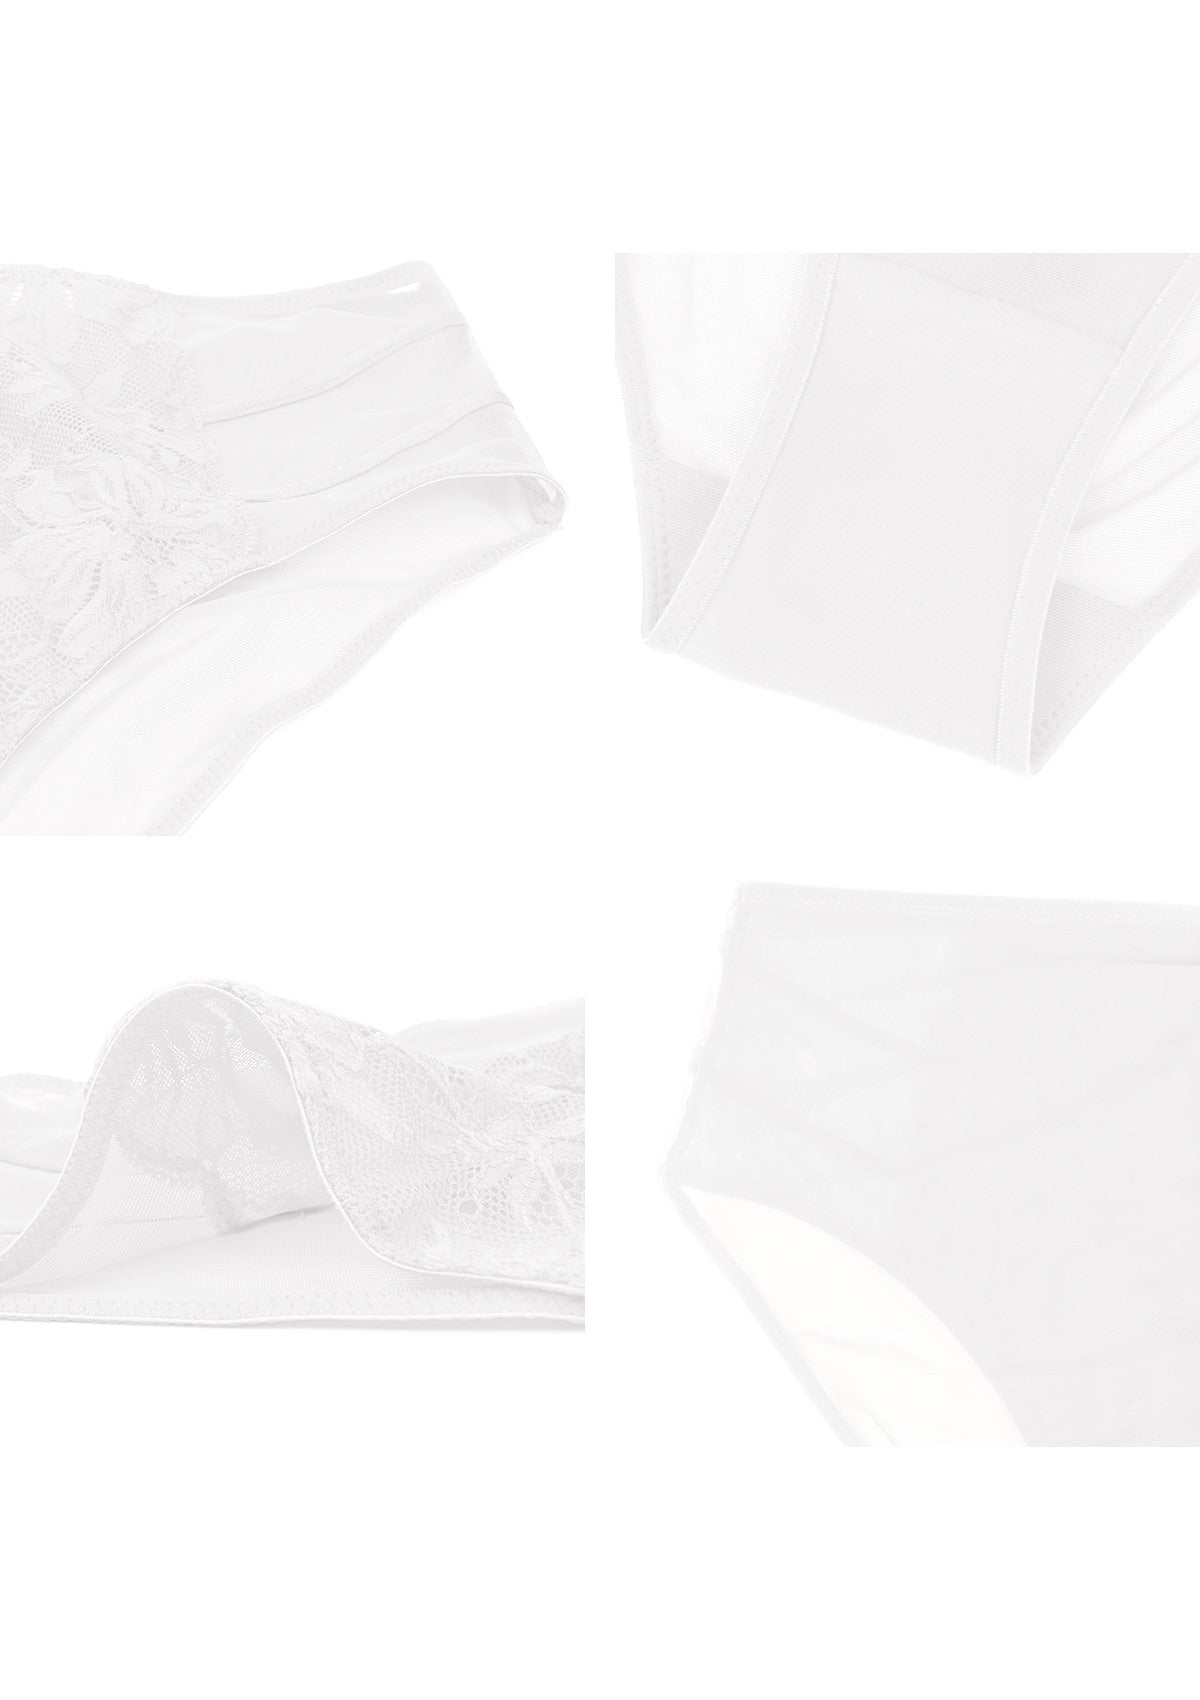 HSIA Spring Romance High-Rise Floral Lacy Panty-Comfort In Style - XXXL / White